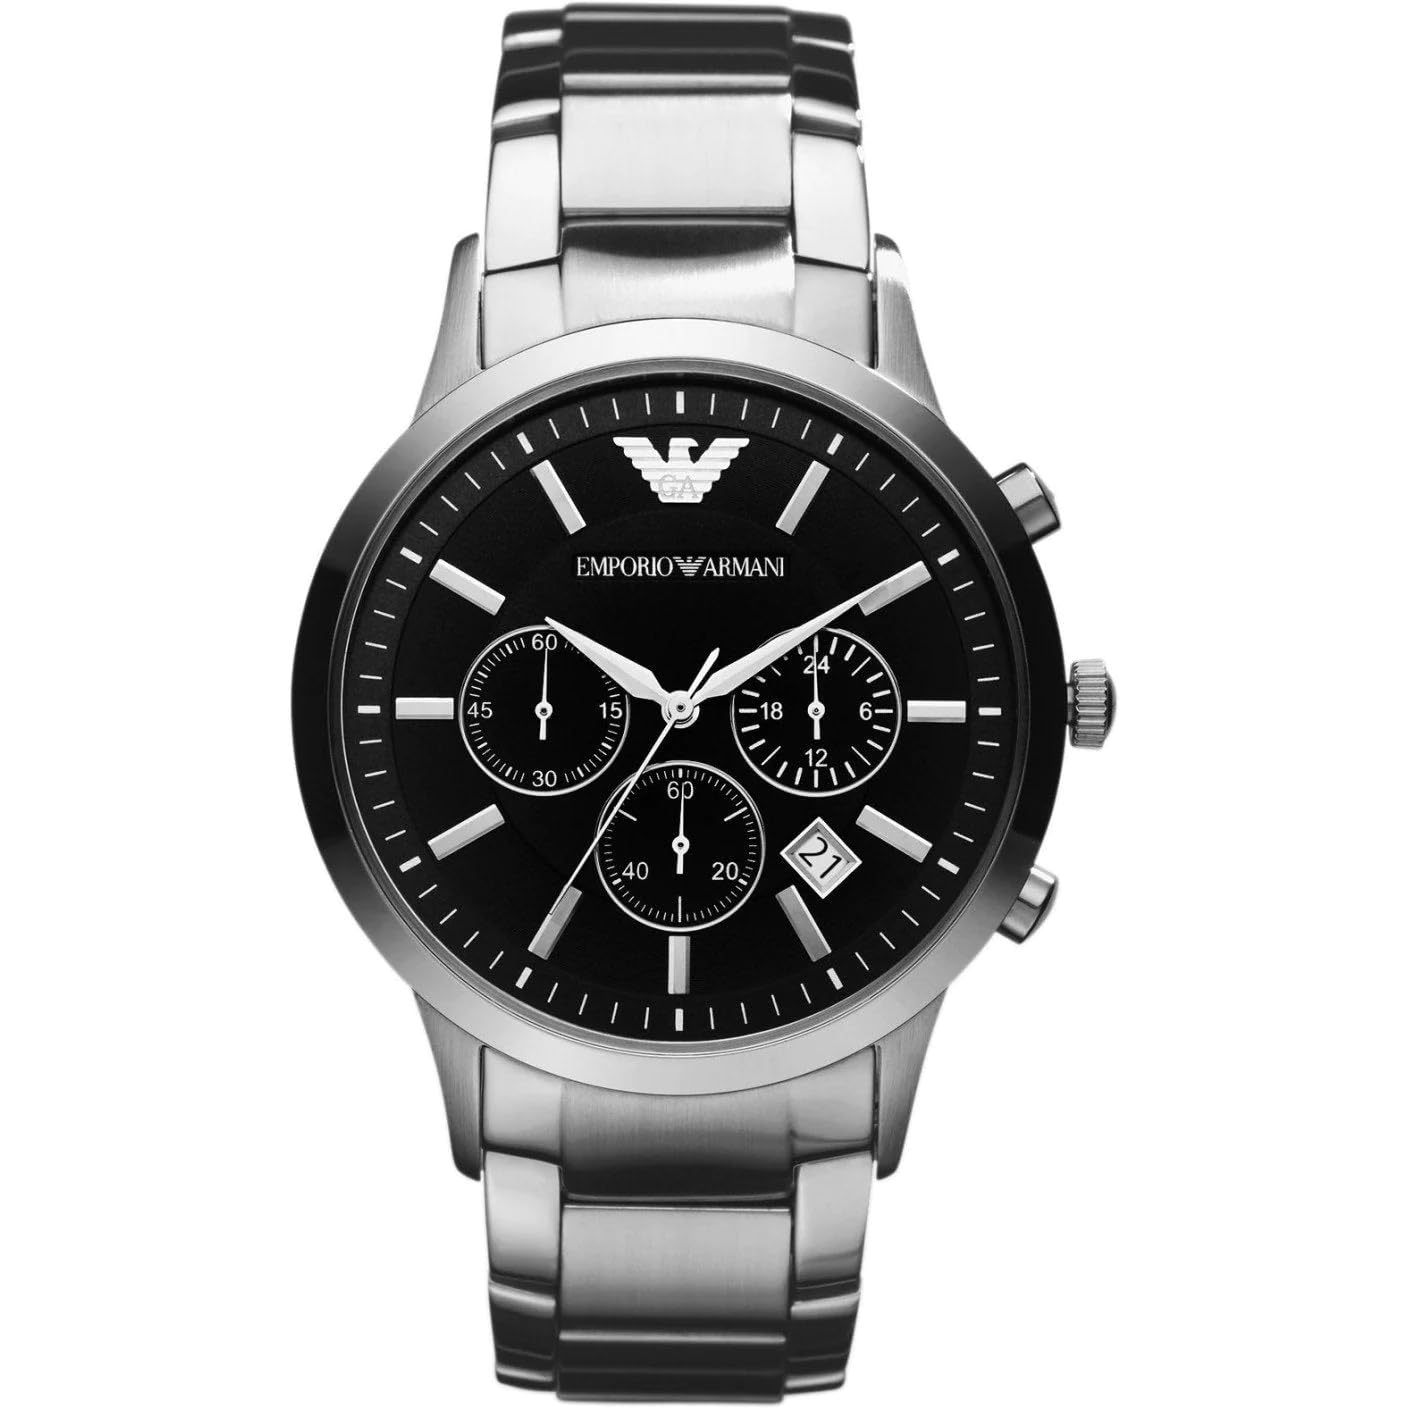 EMPORIO ARMANI Mens Chronograph Stainless Steel Watch (Black_Free Size)